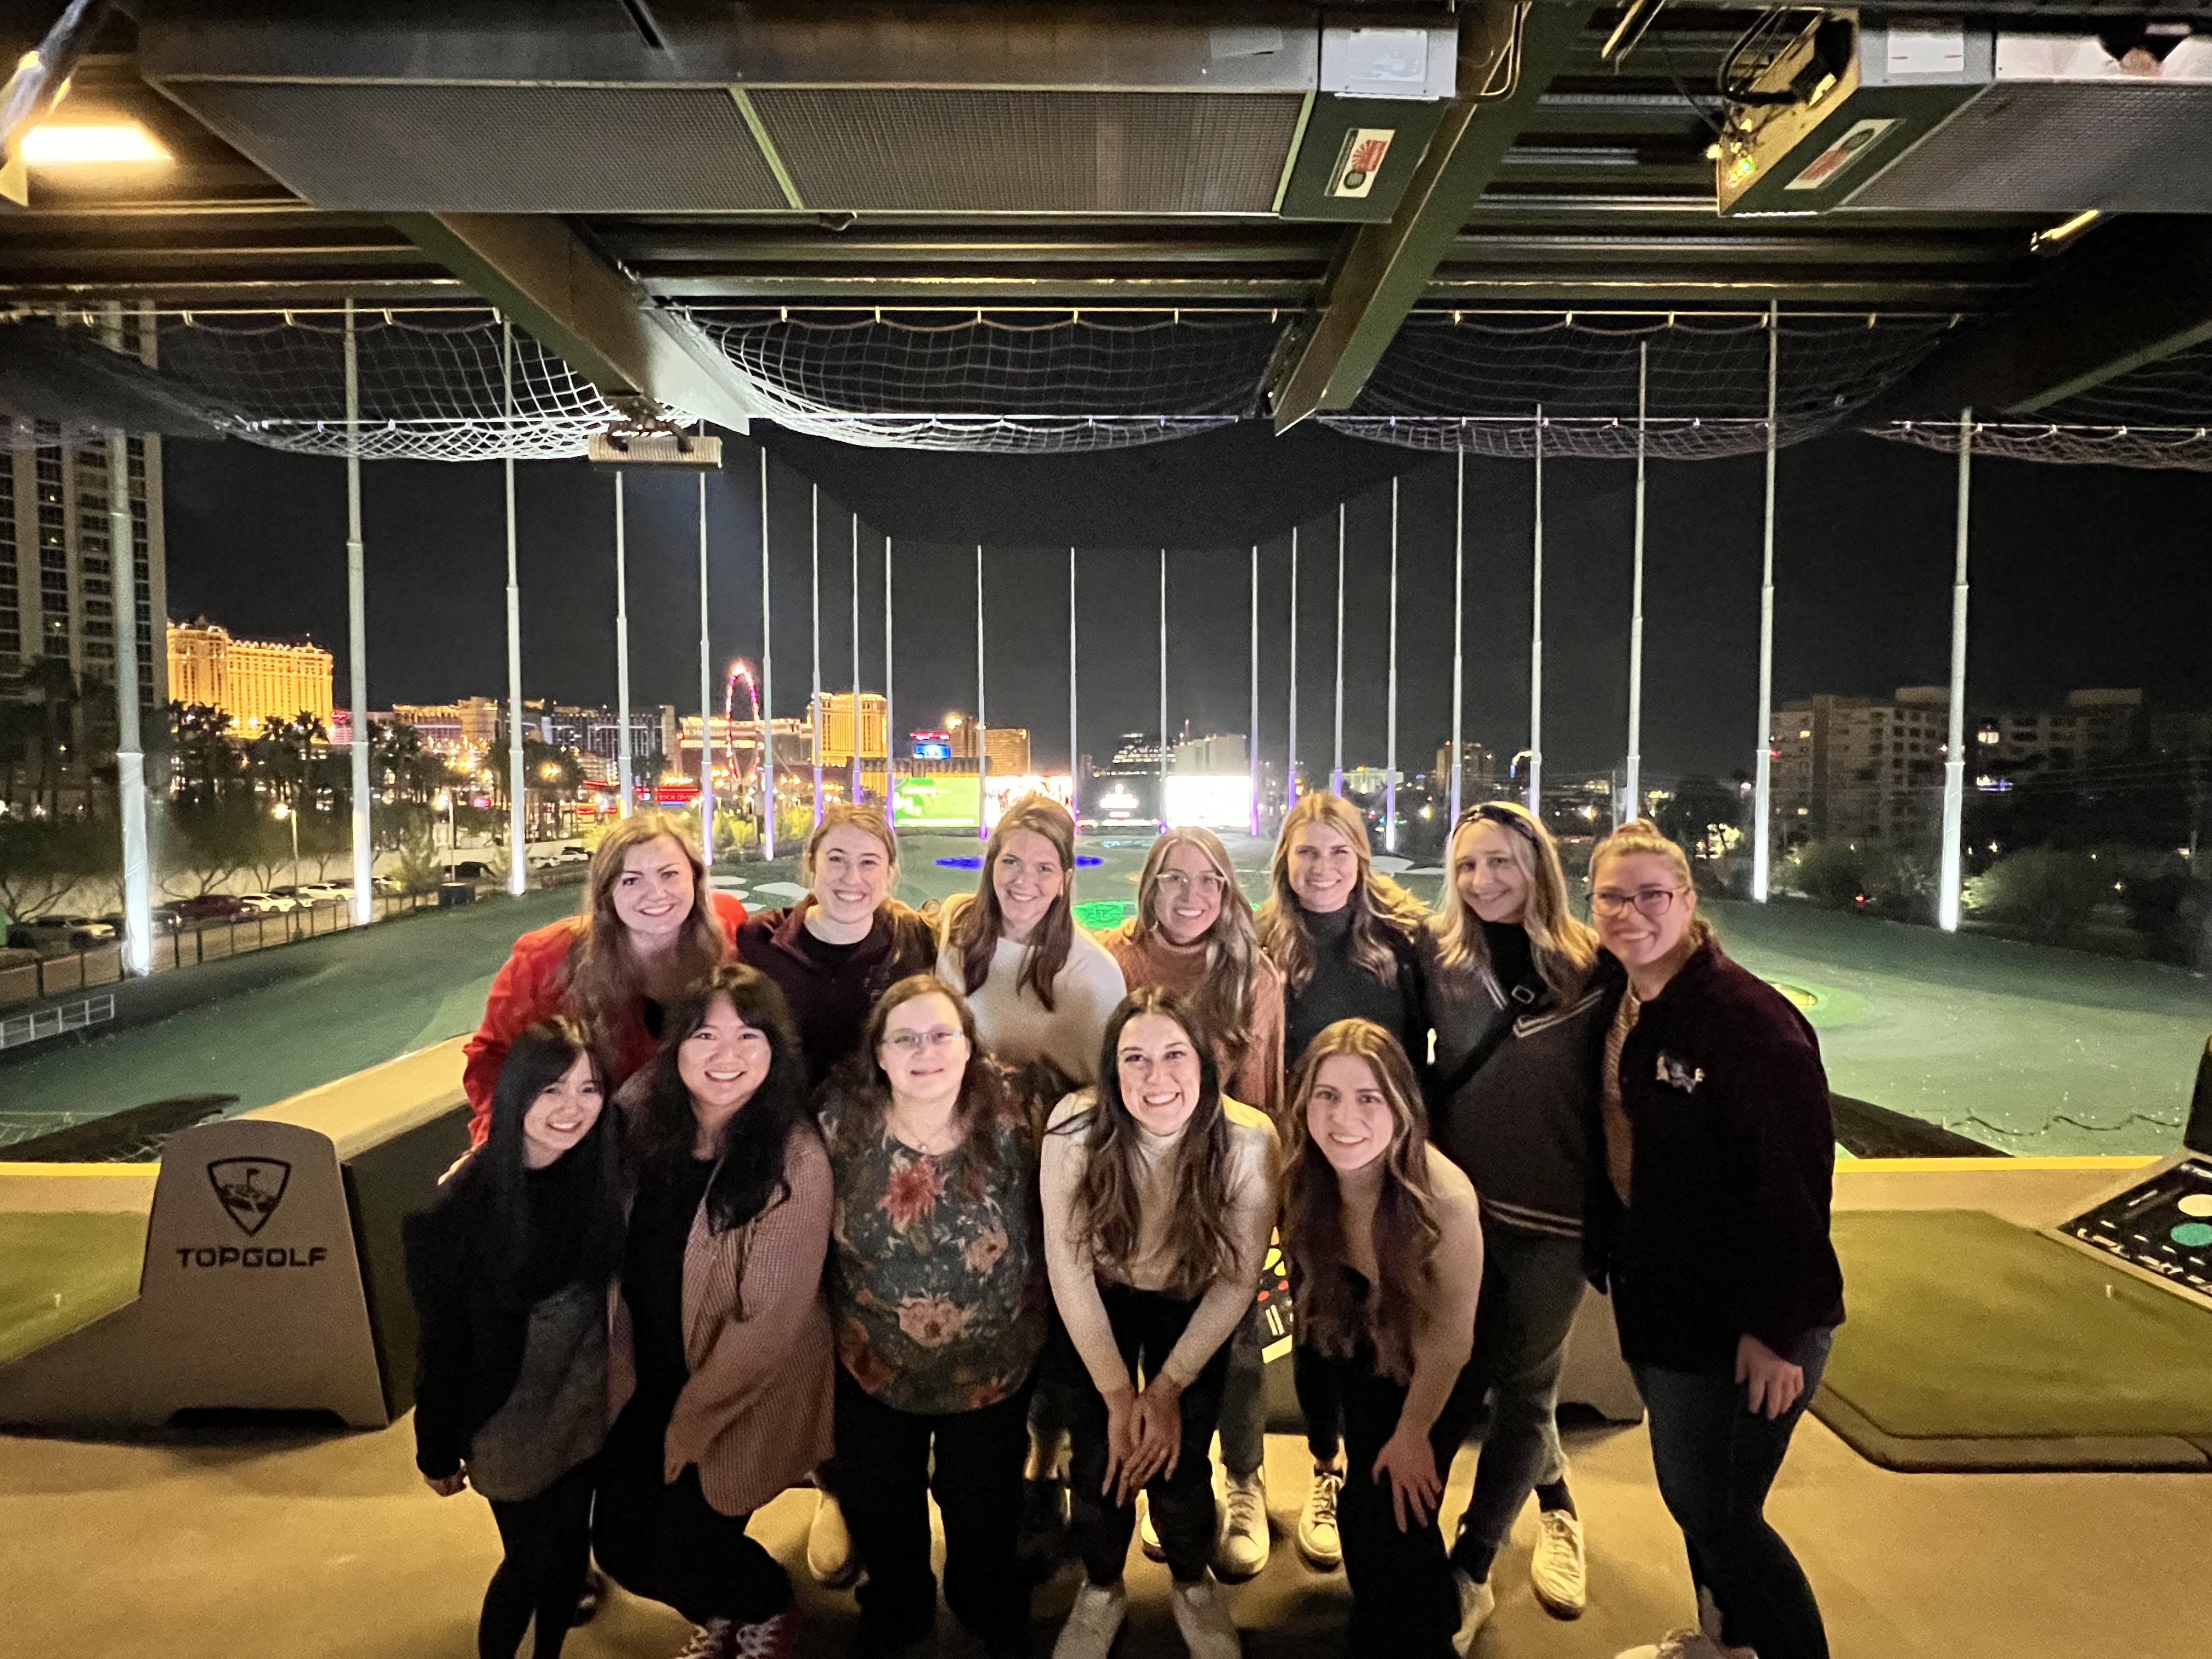 Residents pose at TopGolf.